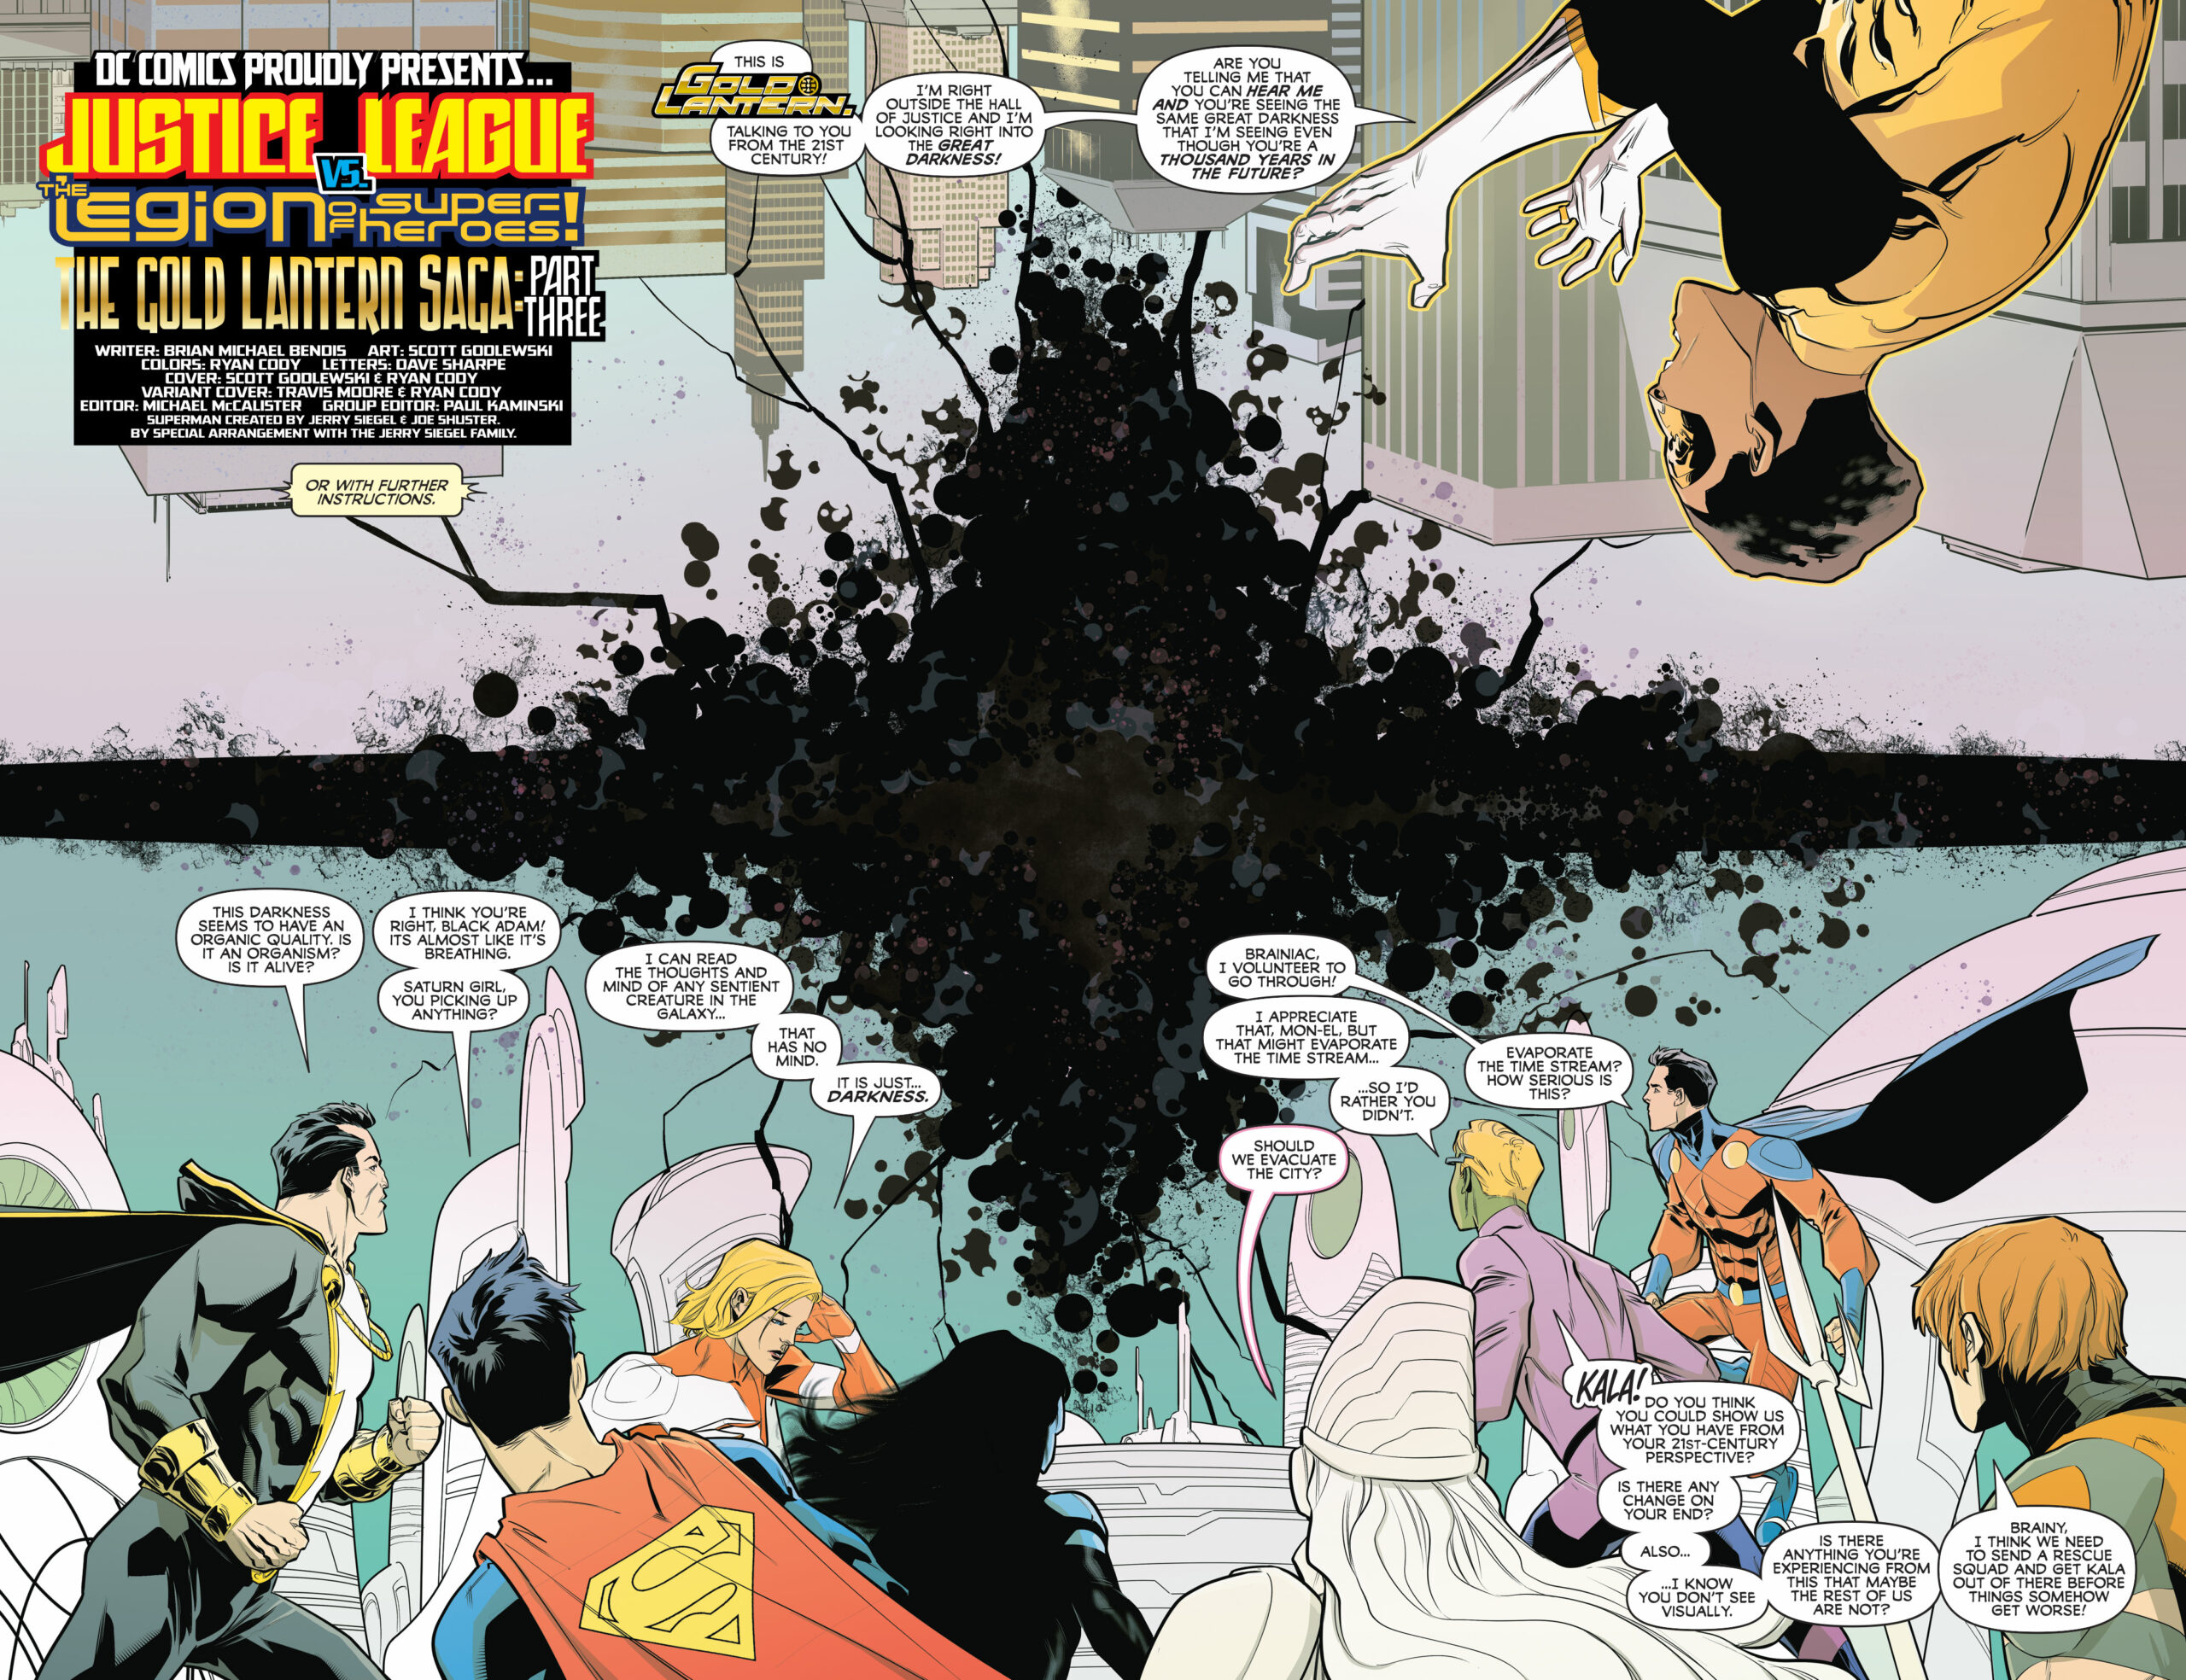 Justice League Vs The Legion of Super-Heroes #3 Pgs 2-3